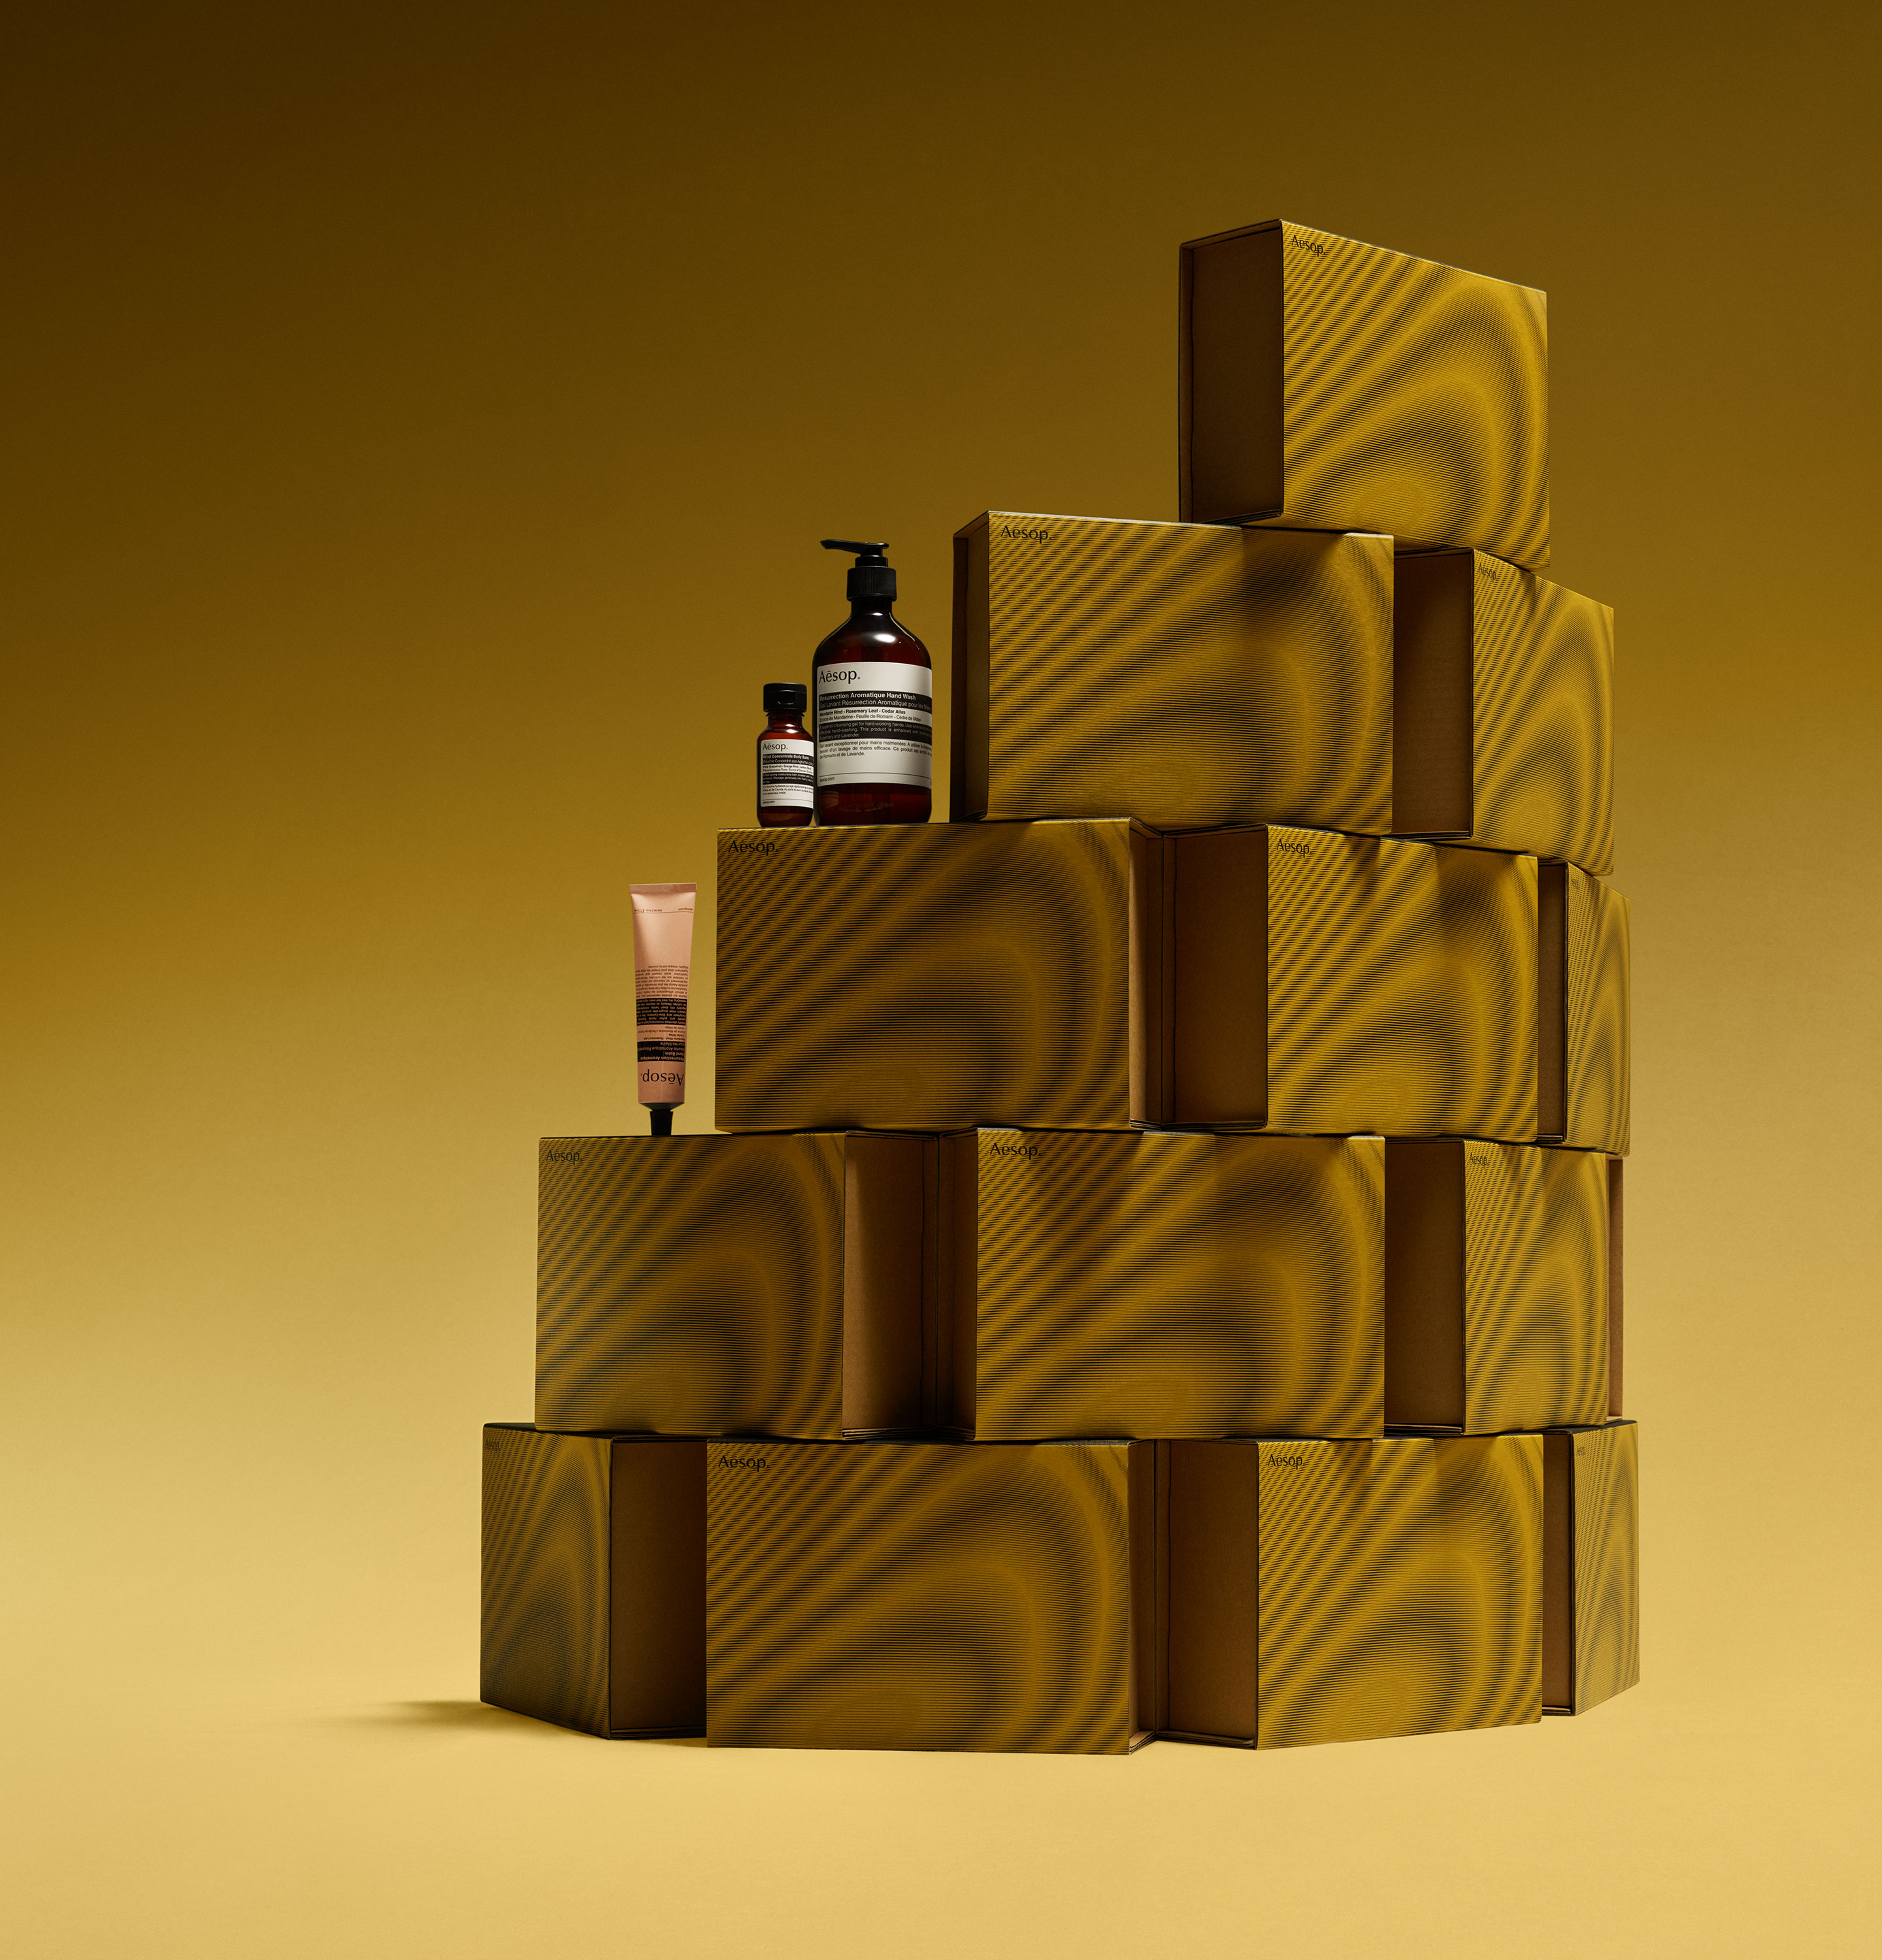 Aesop products placed on stacked mustard yellow cardboard boxes.